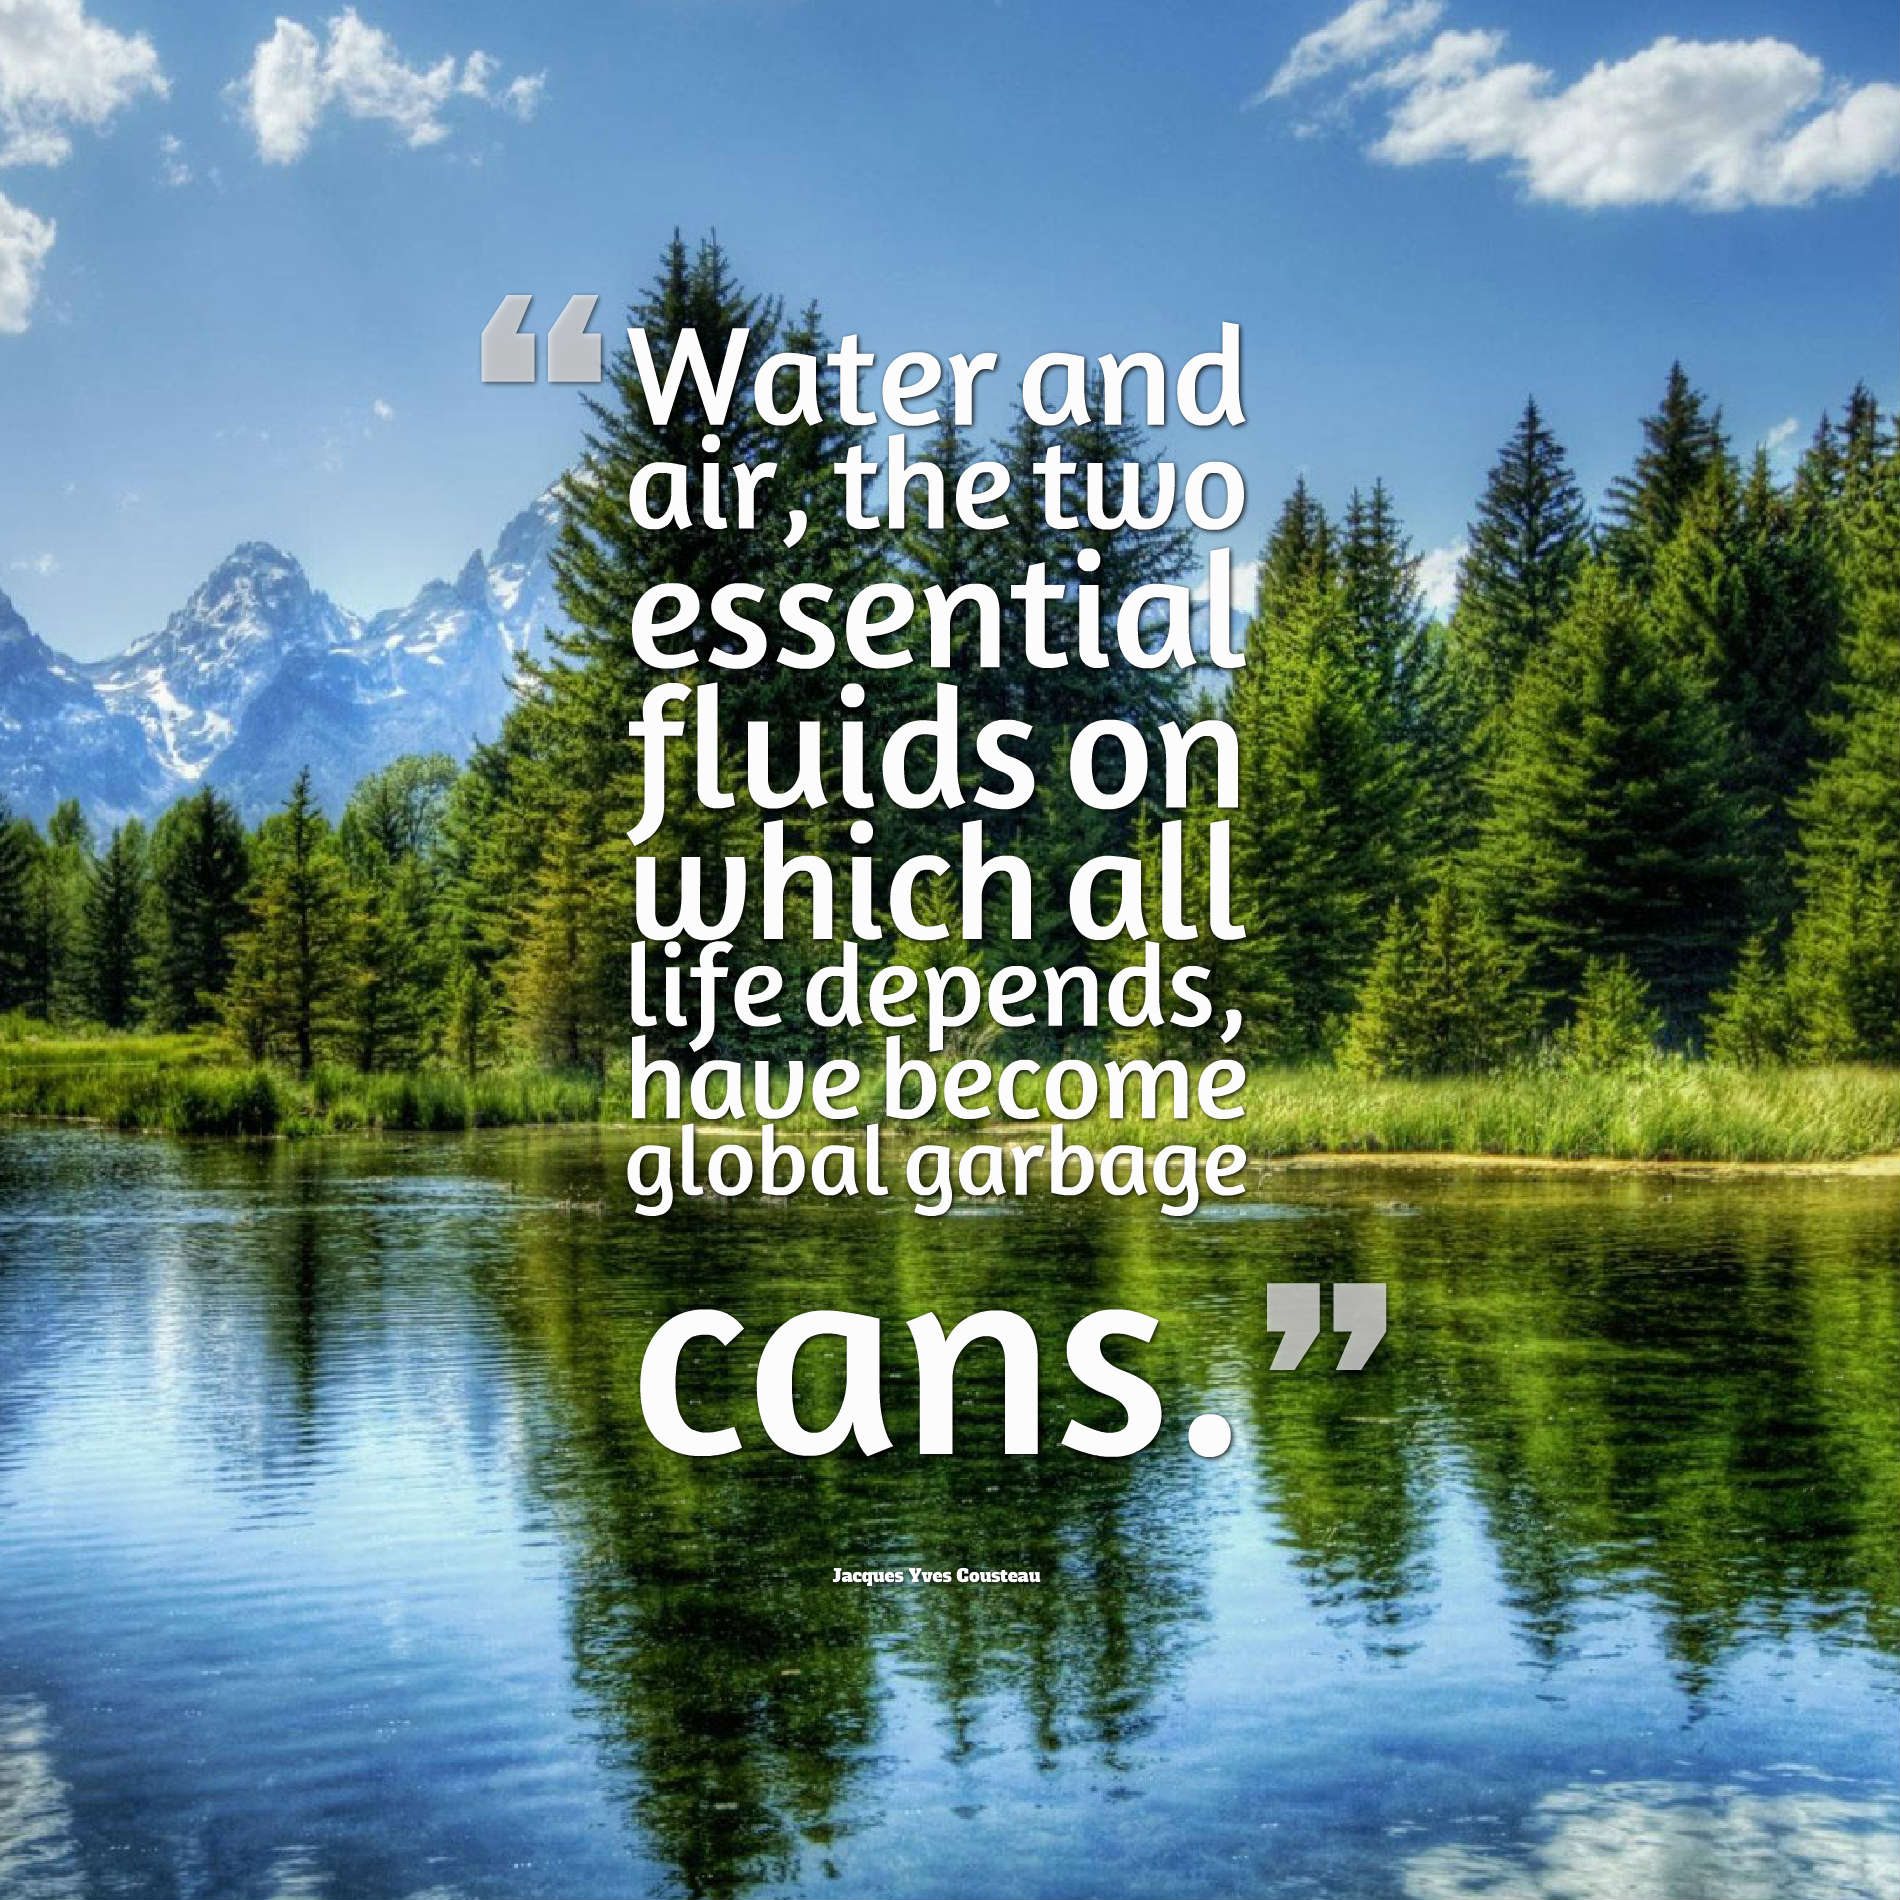 Water and air, the two essential fluids on which all life depends, have become global garbage cans.